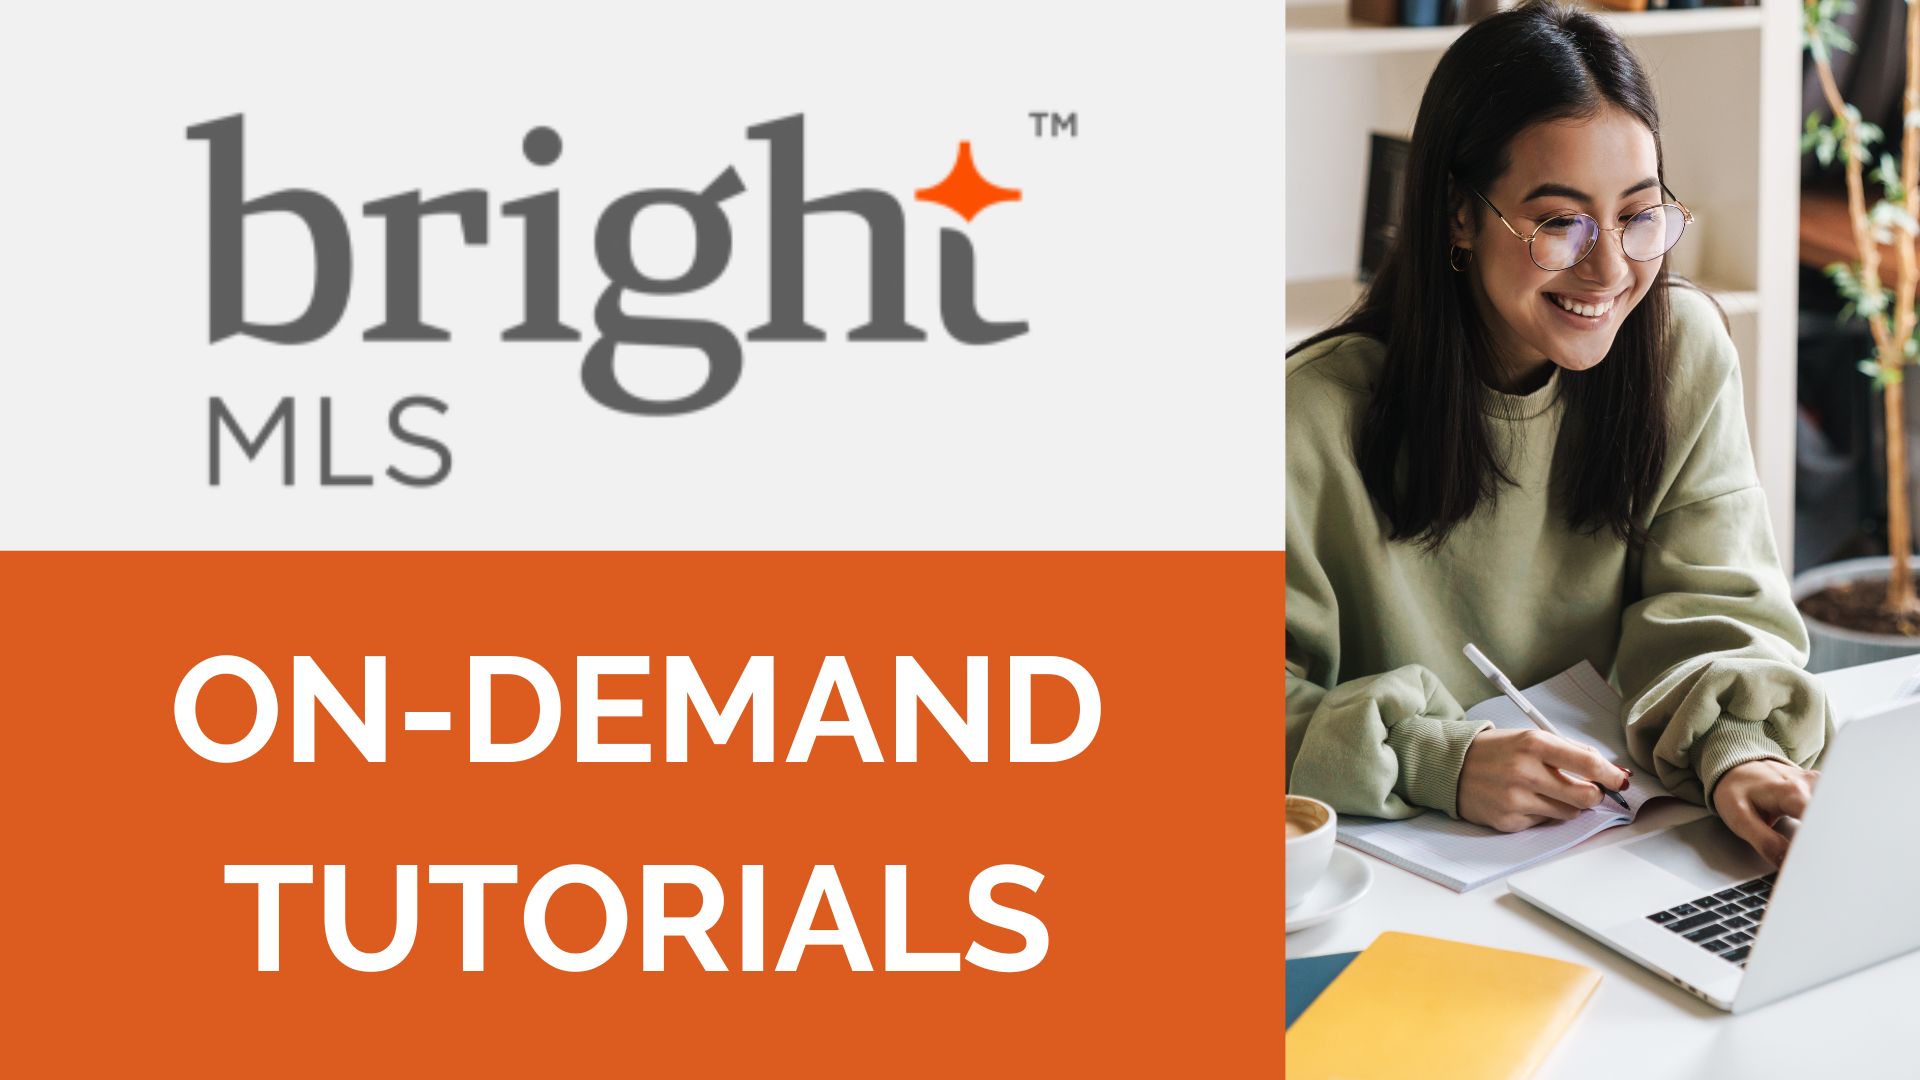 Text says Bright MLS: On-demand tutorials and to the right is a woman smiling and looking at her computer as she accesses tutorials